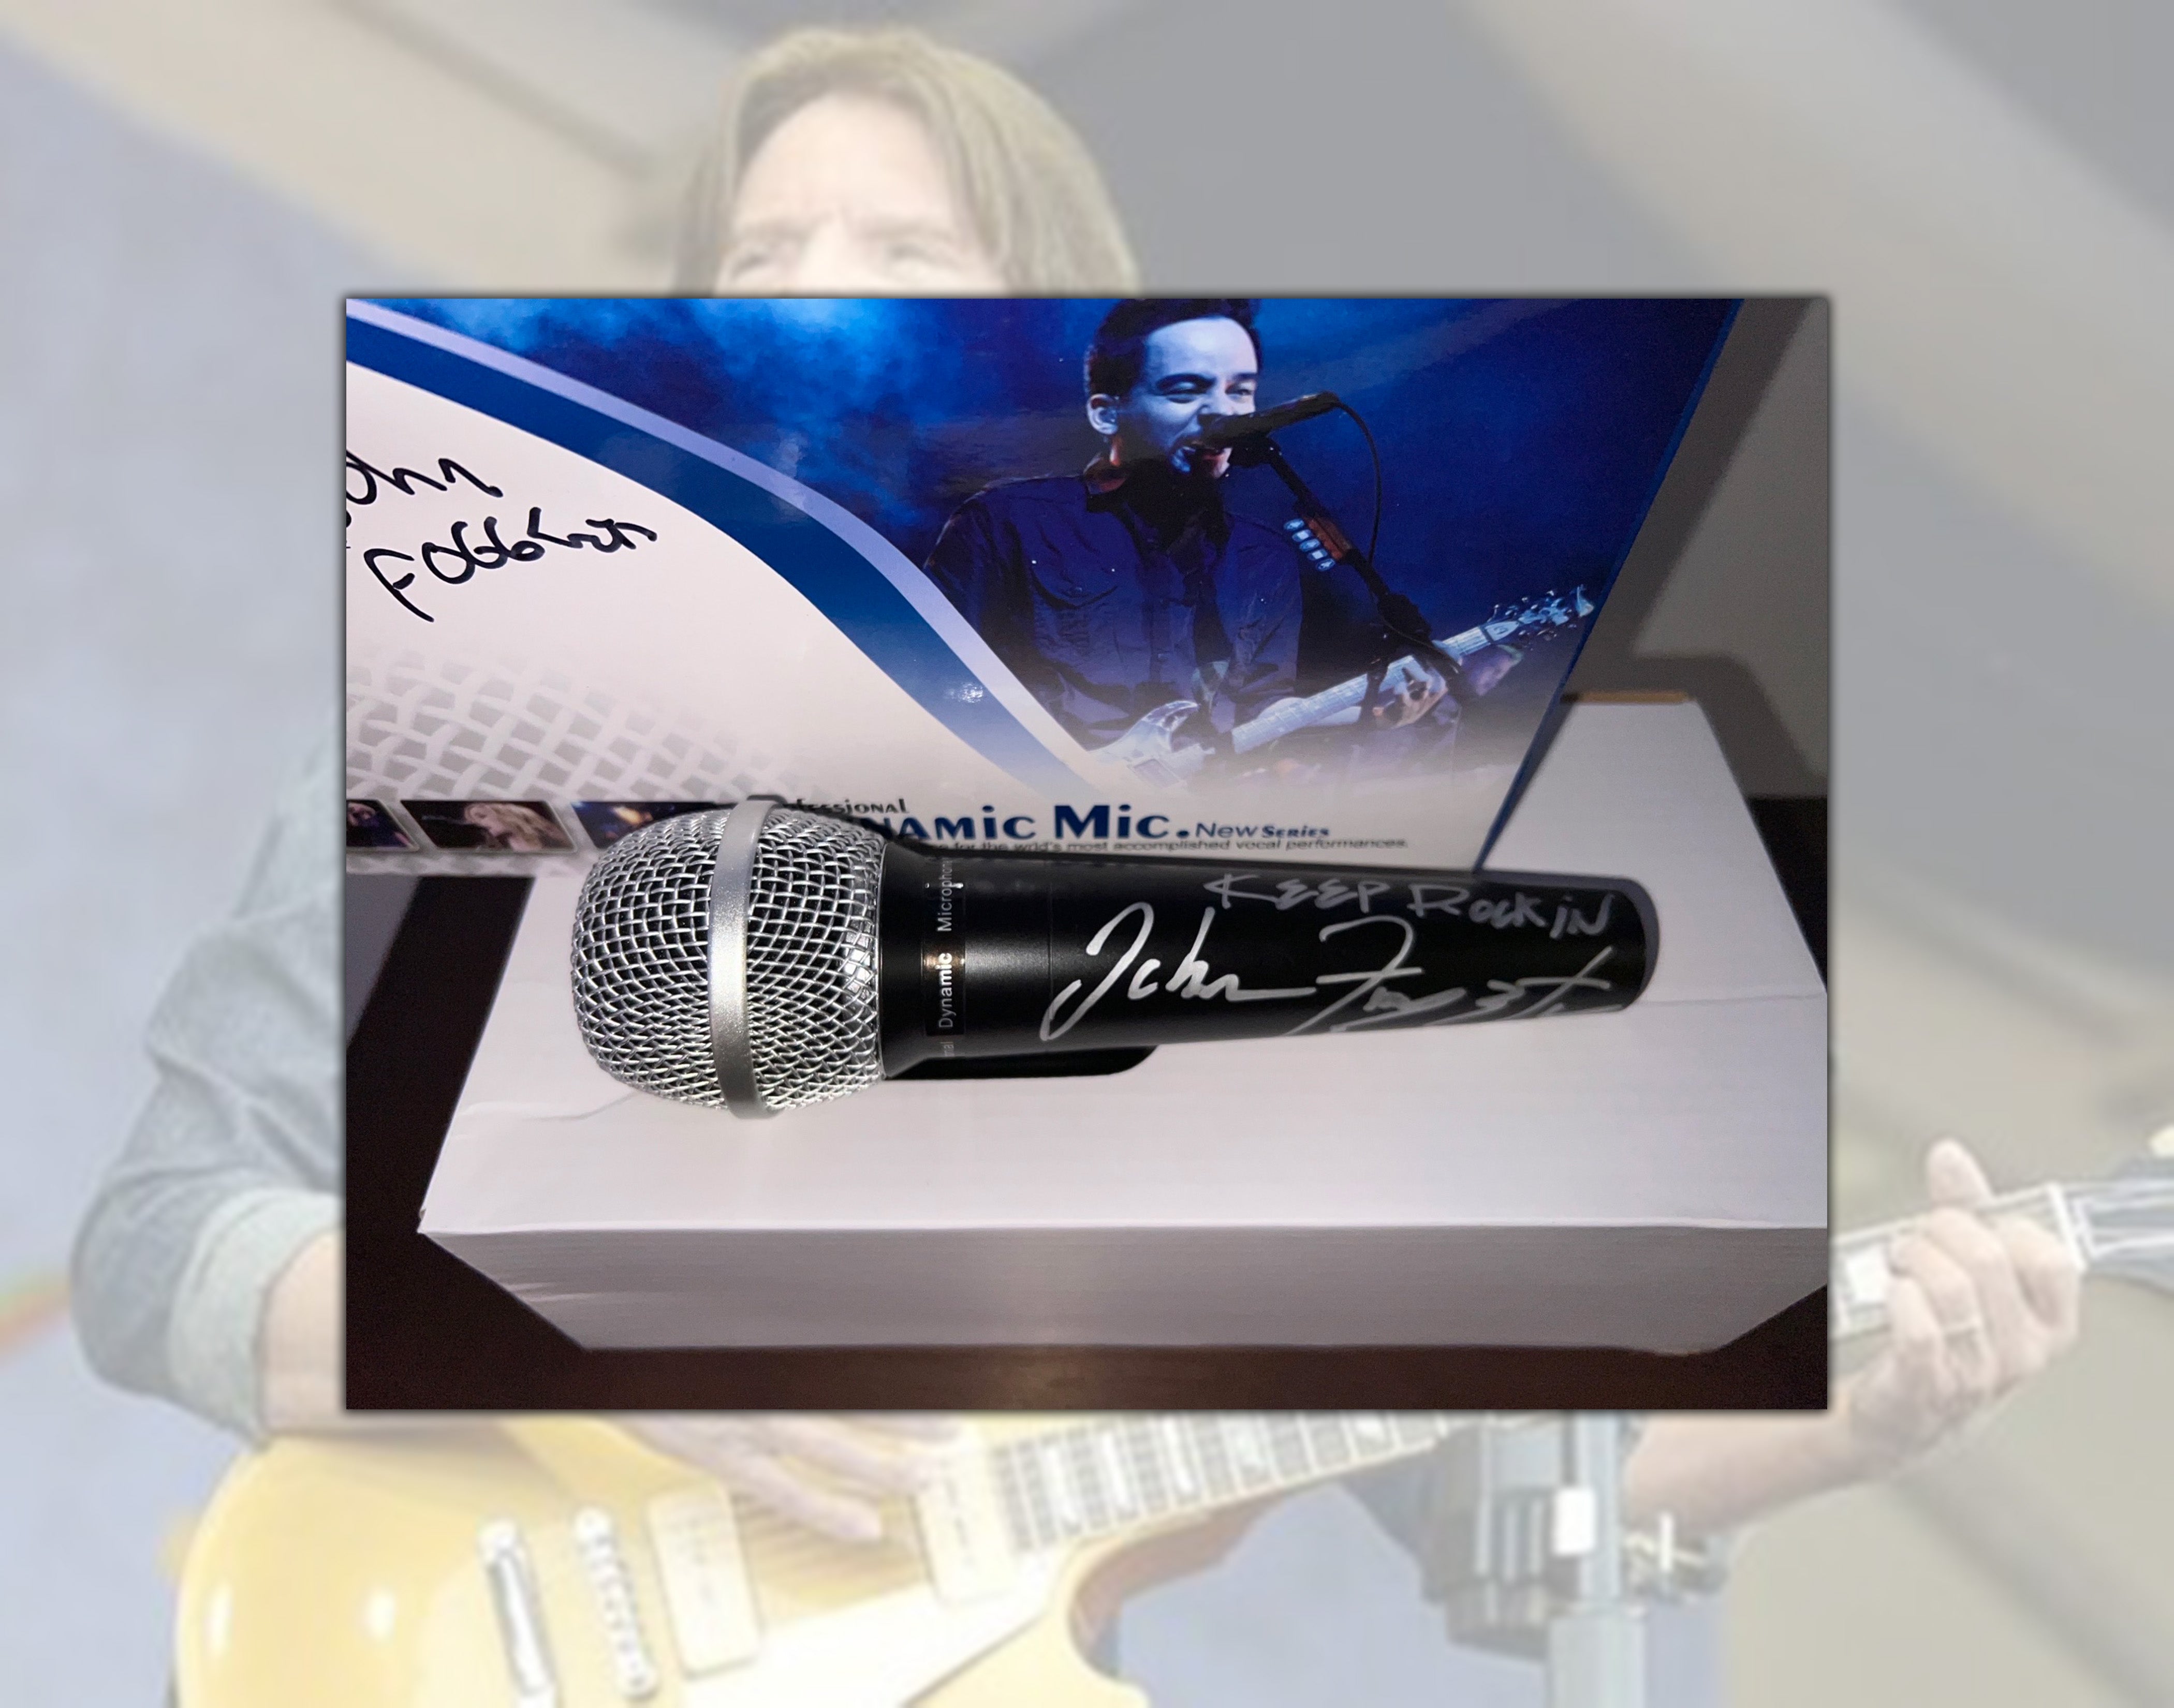 John Fogerty CCR lead singer microphone signed with proof